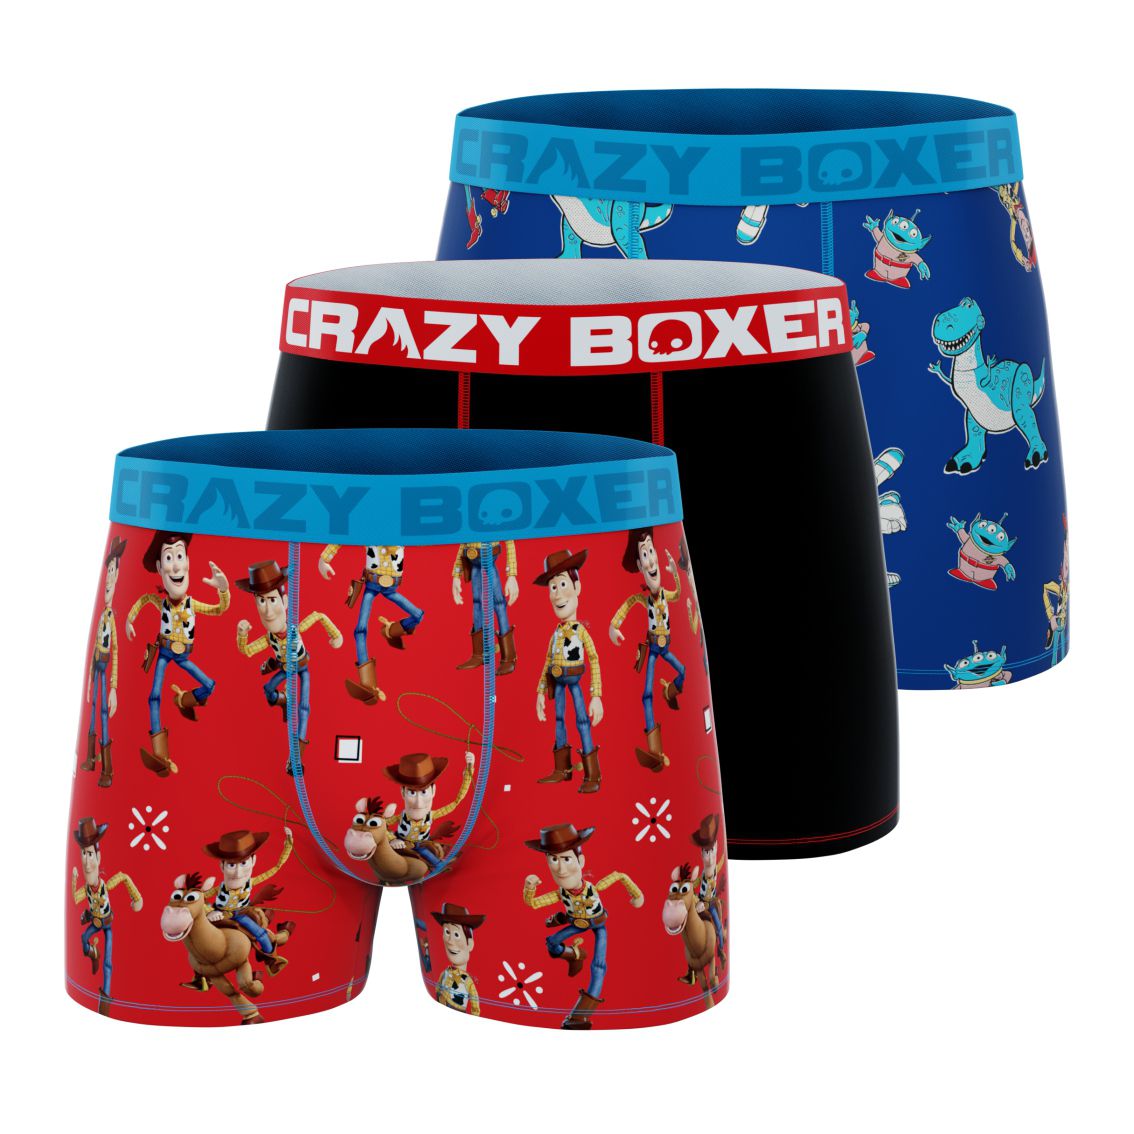 CRAZYBOXER Toy Story All Characters; Men's Boxer Briefs, 3-Pack 